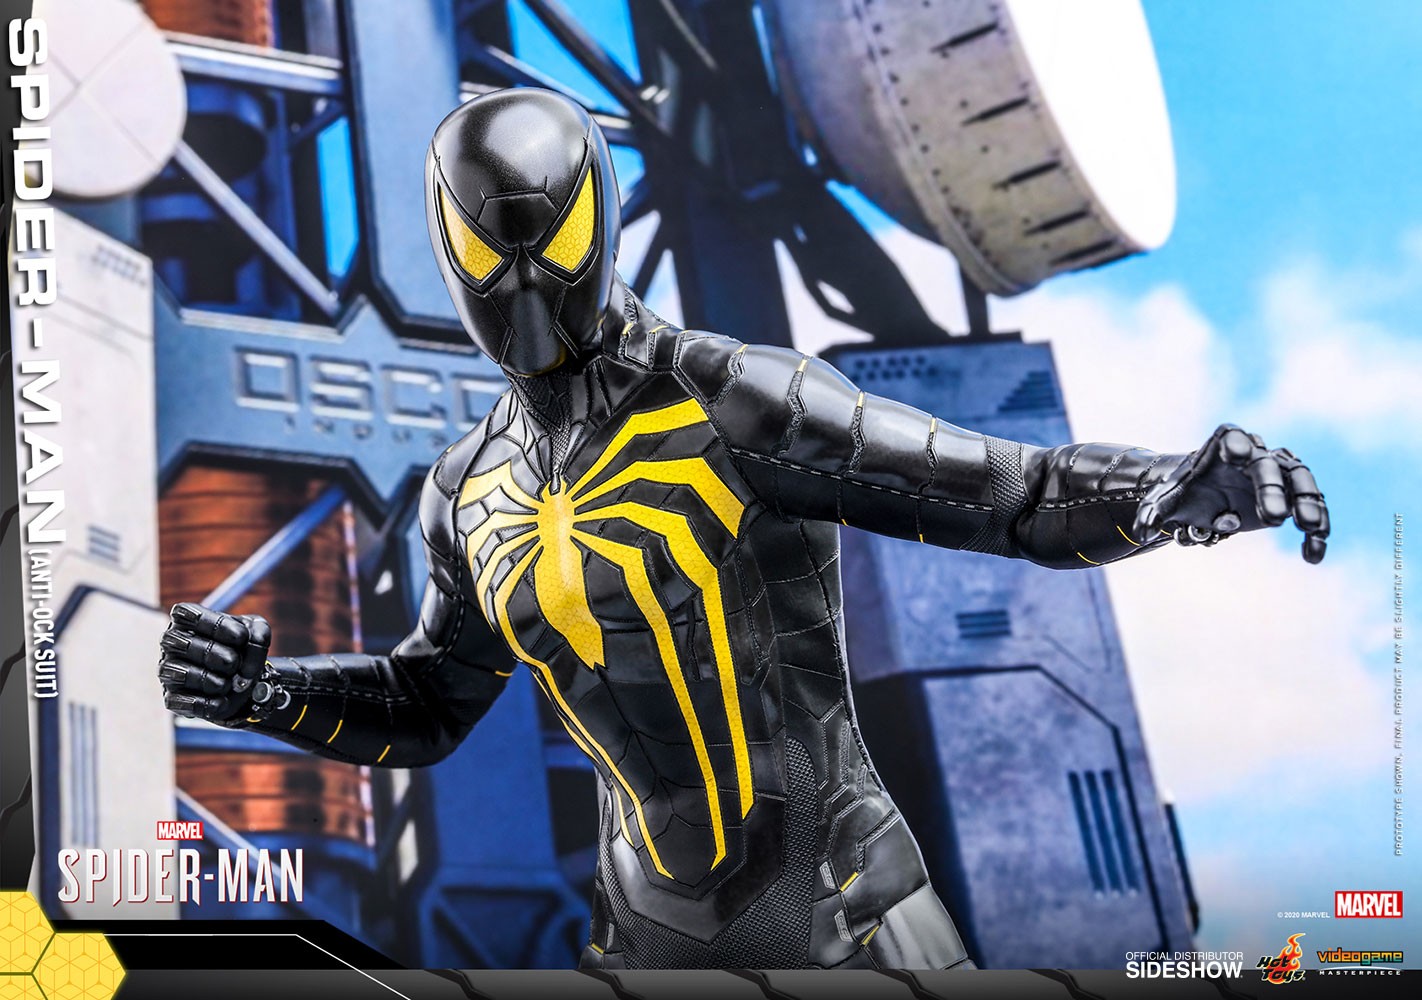 Spider-Man (Anti-Ock Suit) Collector Edition (Prototype Shown) View 9